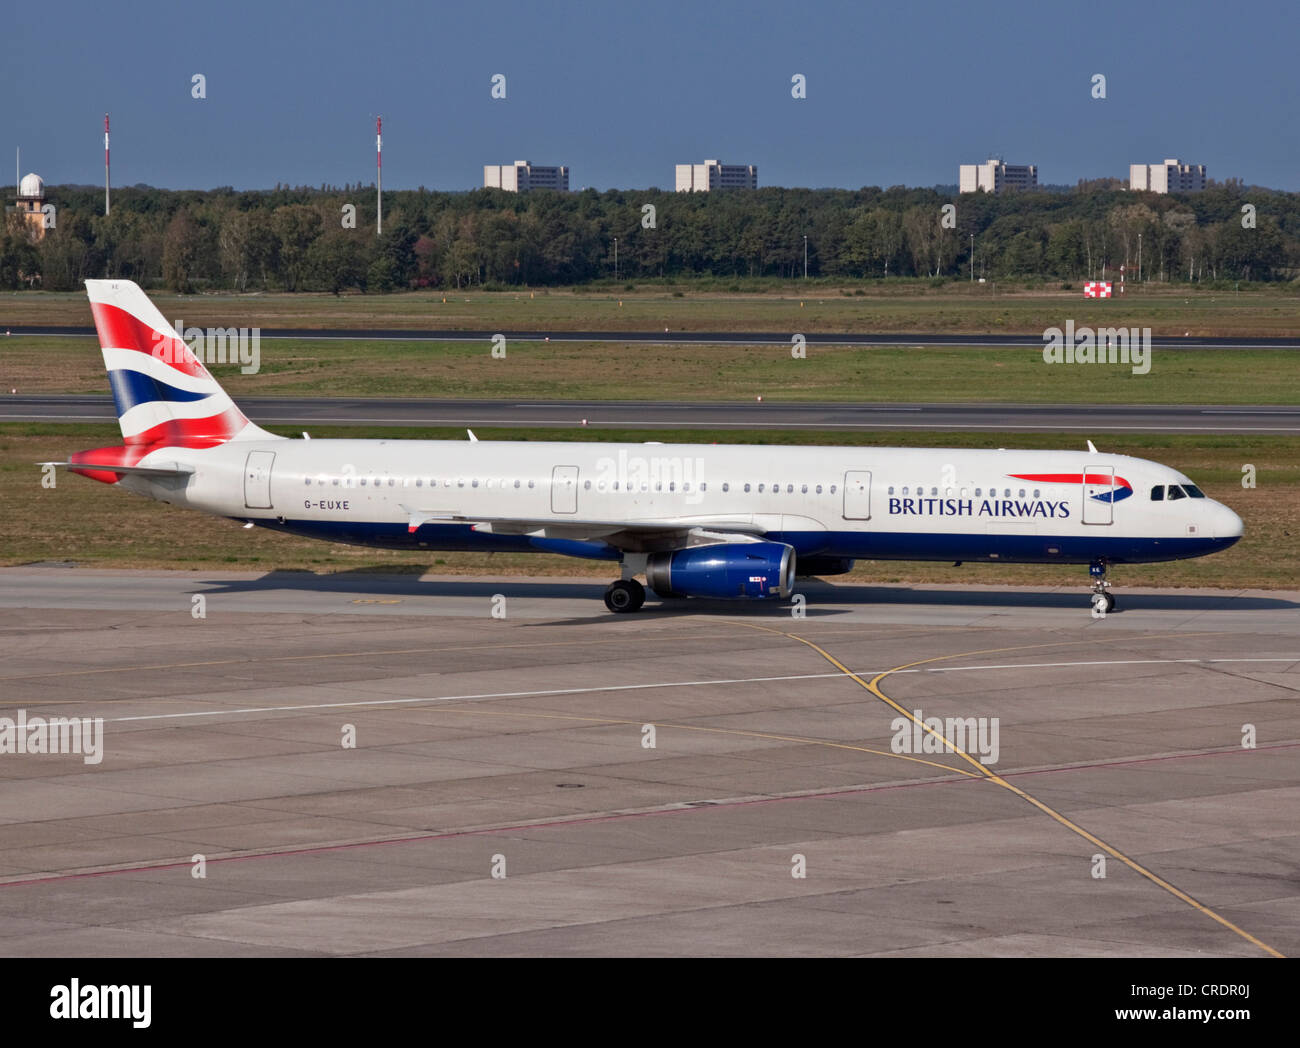 British Airways passenger aircraft on a runway, Berlin Tegel Otto Lilienthal Airport, Berlin, Germany, Europe Stock Photo